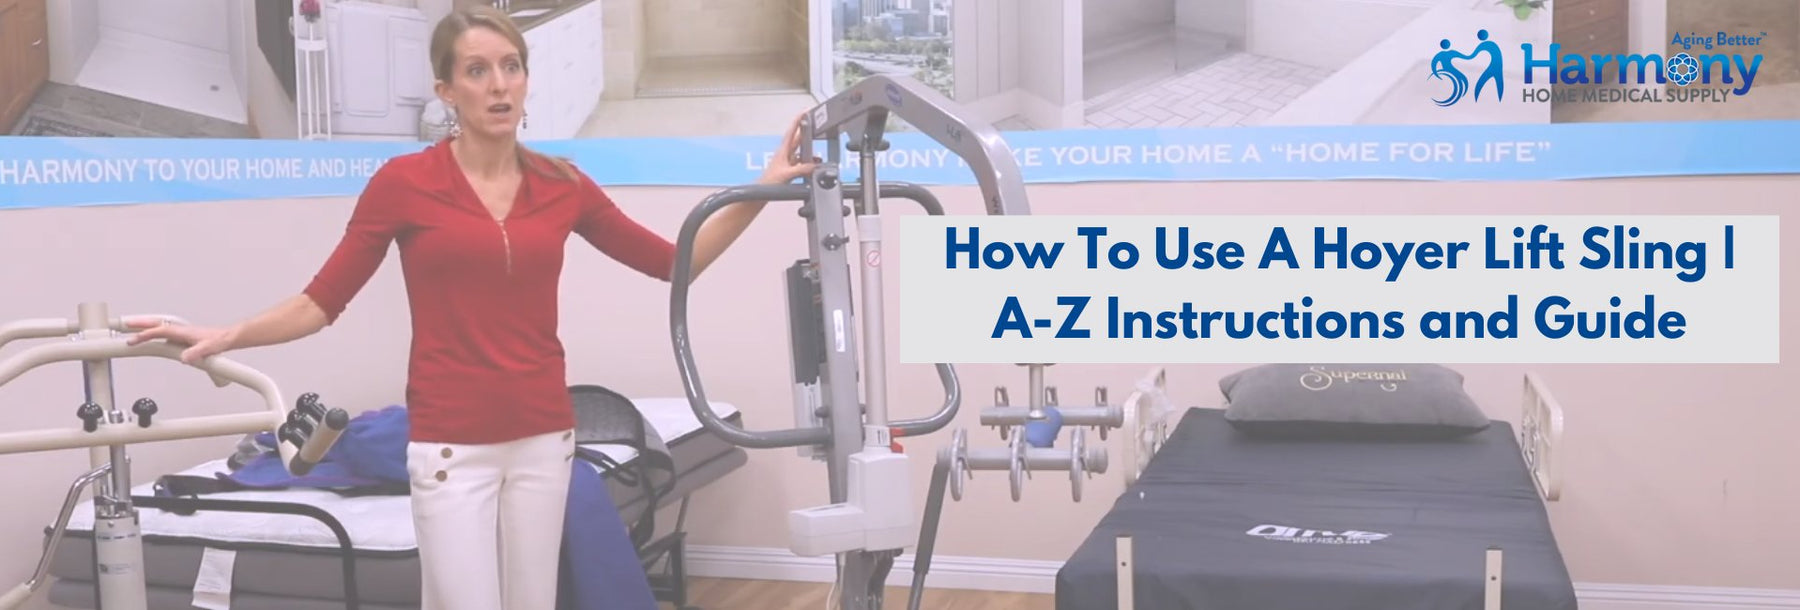 How To Use A Hoyer Lift Sling | A-Z Instructions and Guide - Harmony Home Medical Supply